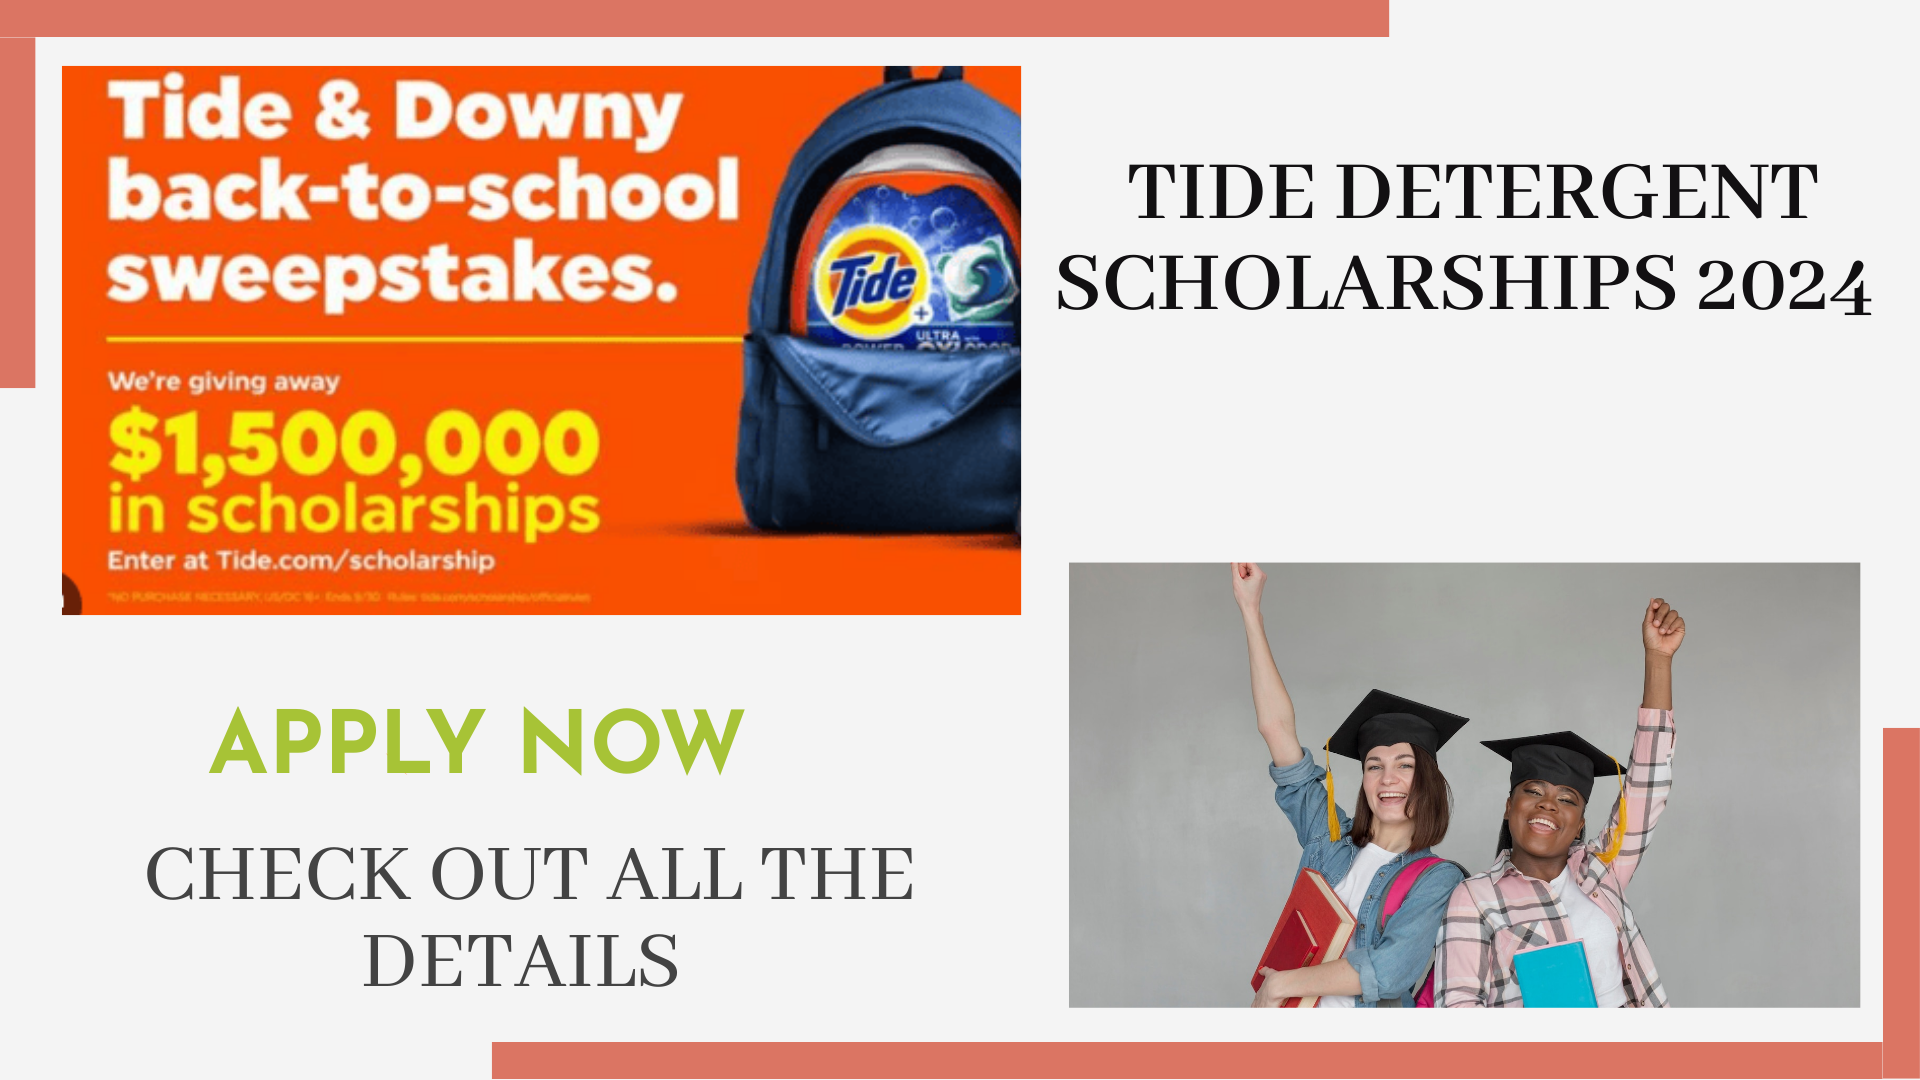 Tide and Downy Back to School Scholarship Tide Detergent Scholarships 2024